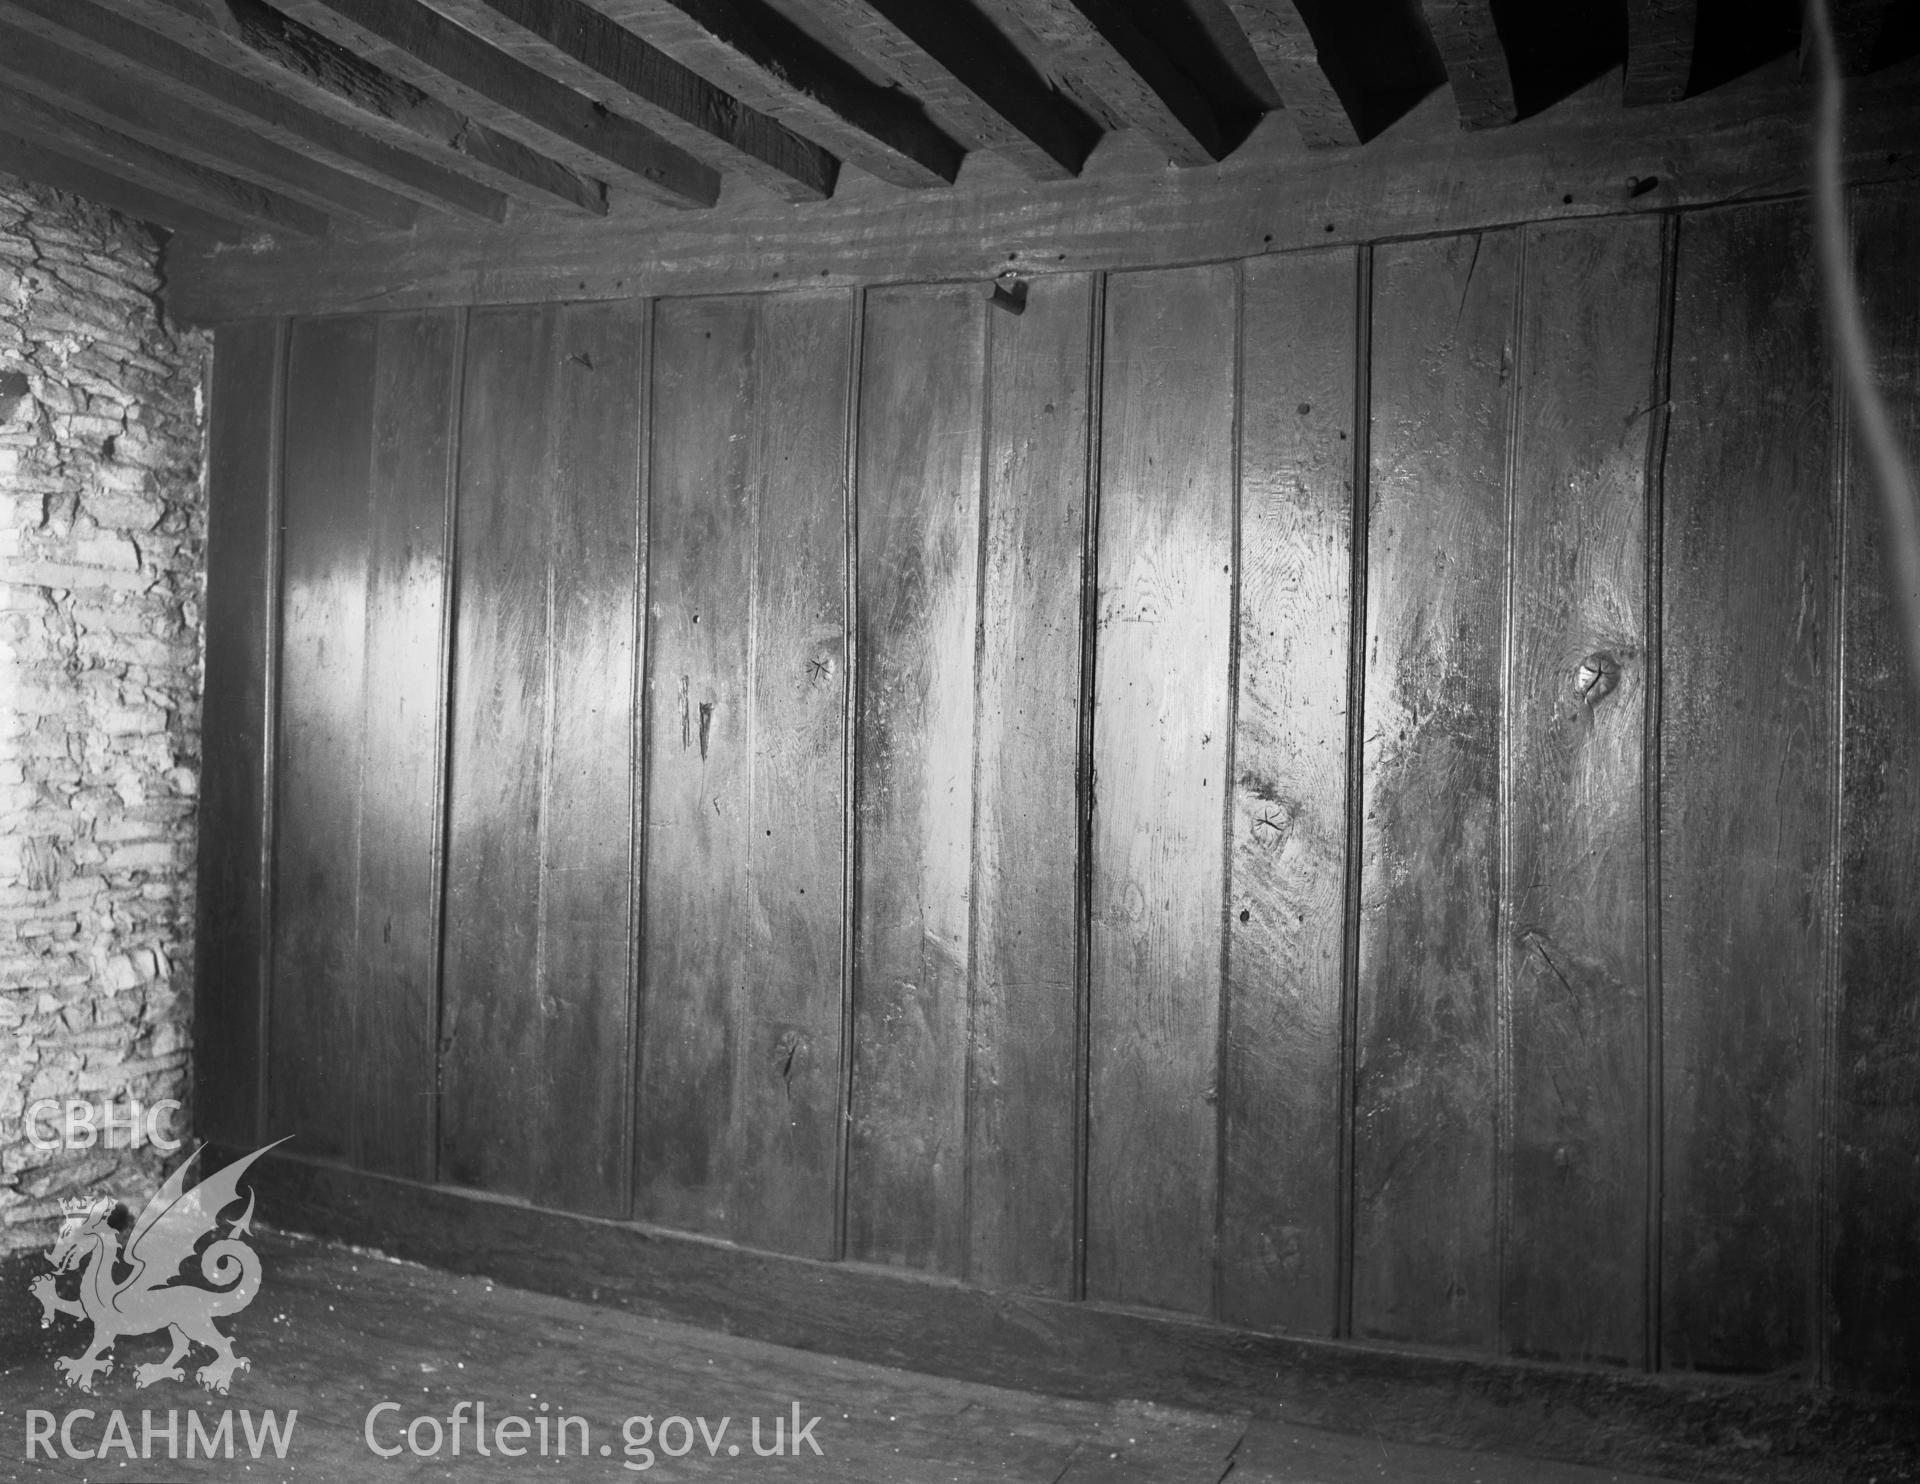 View of wooden screen in Parlwr Mawr, Conwy taken 01.01.1947.